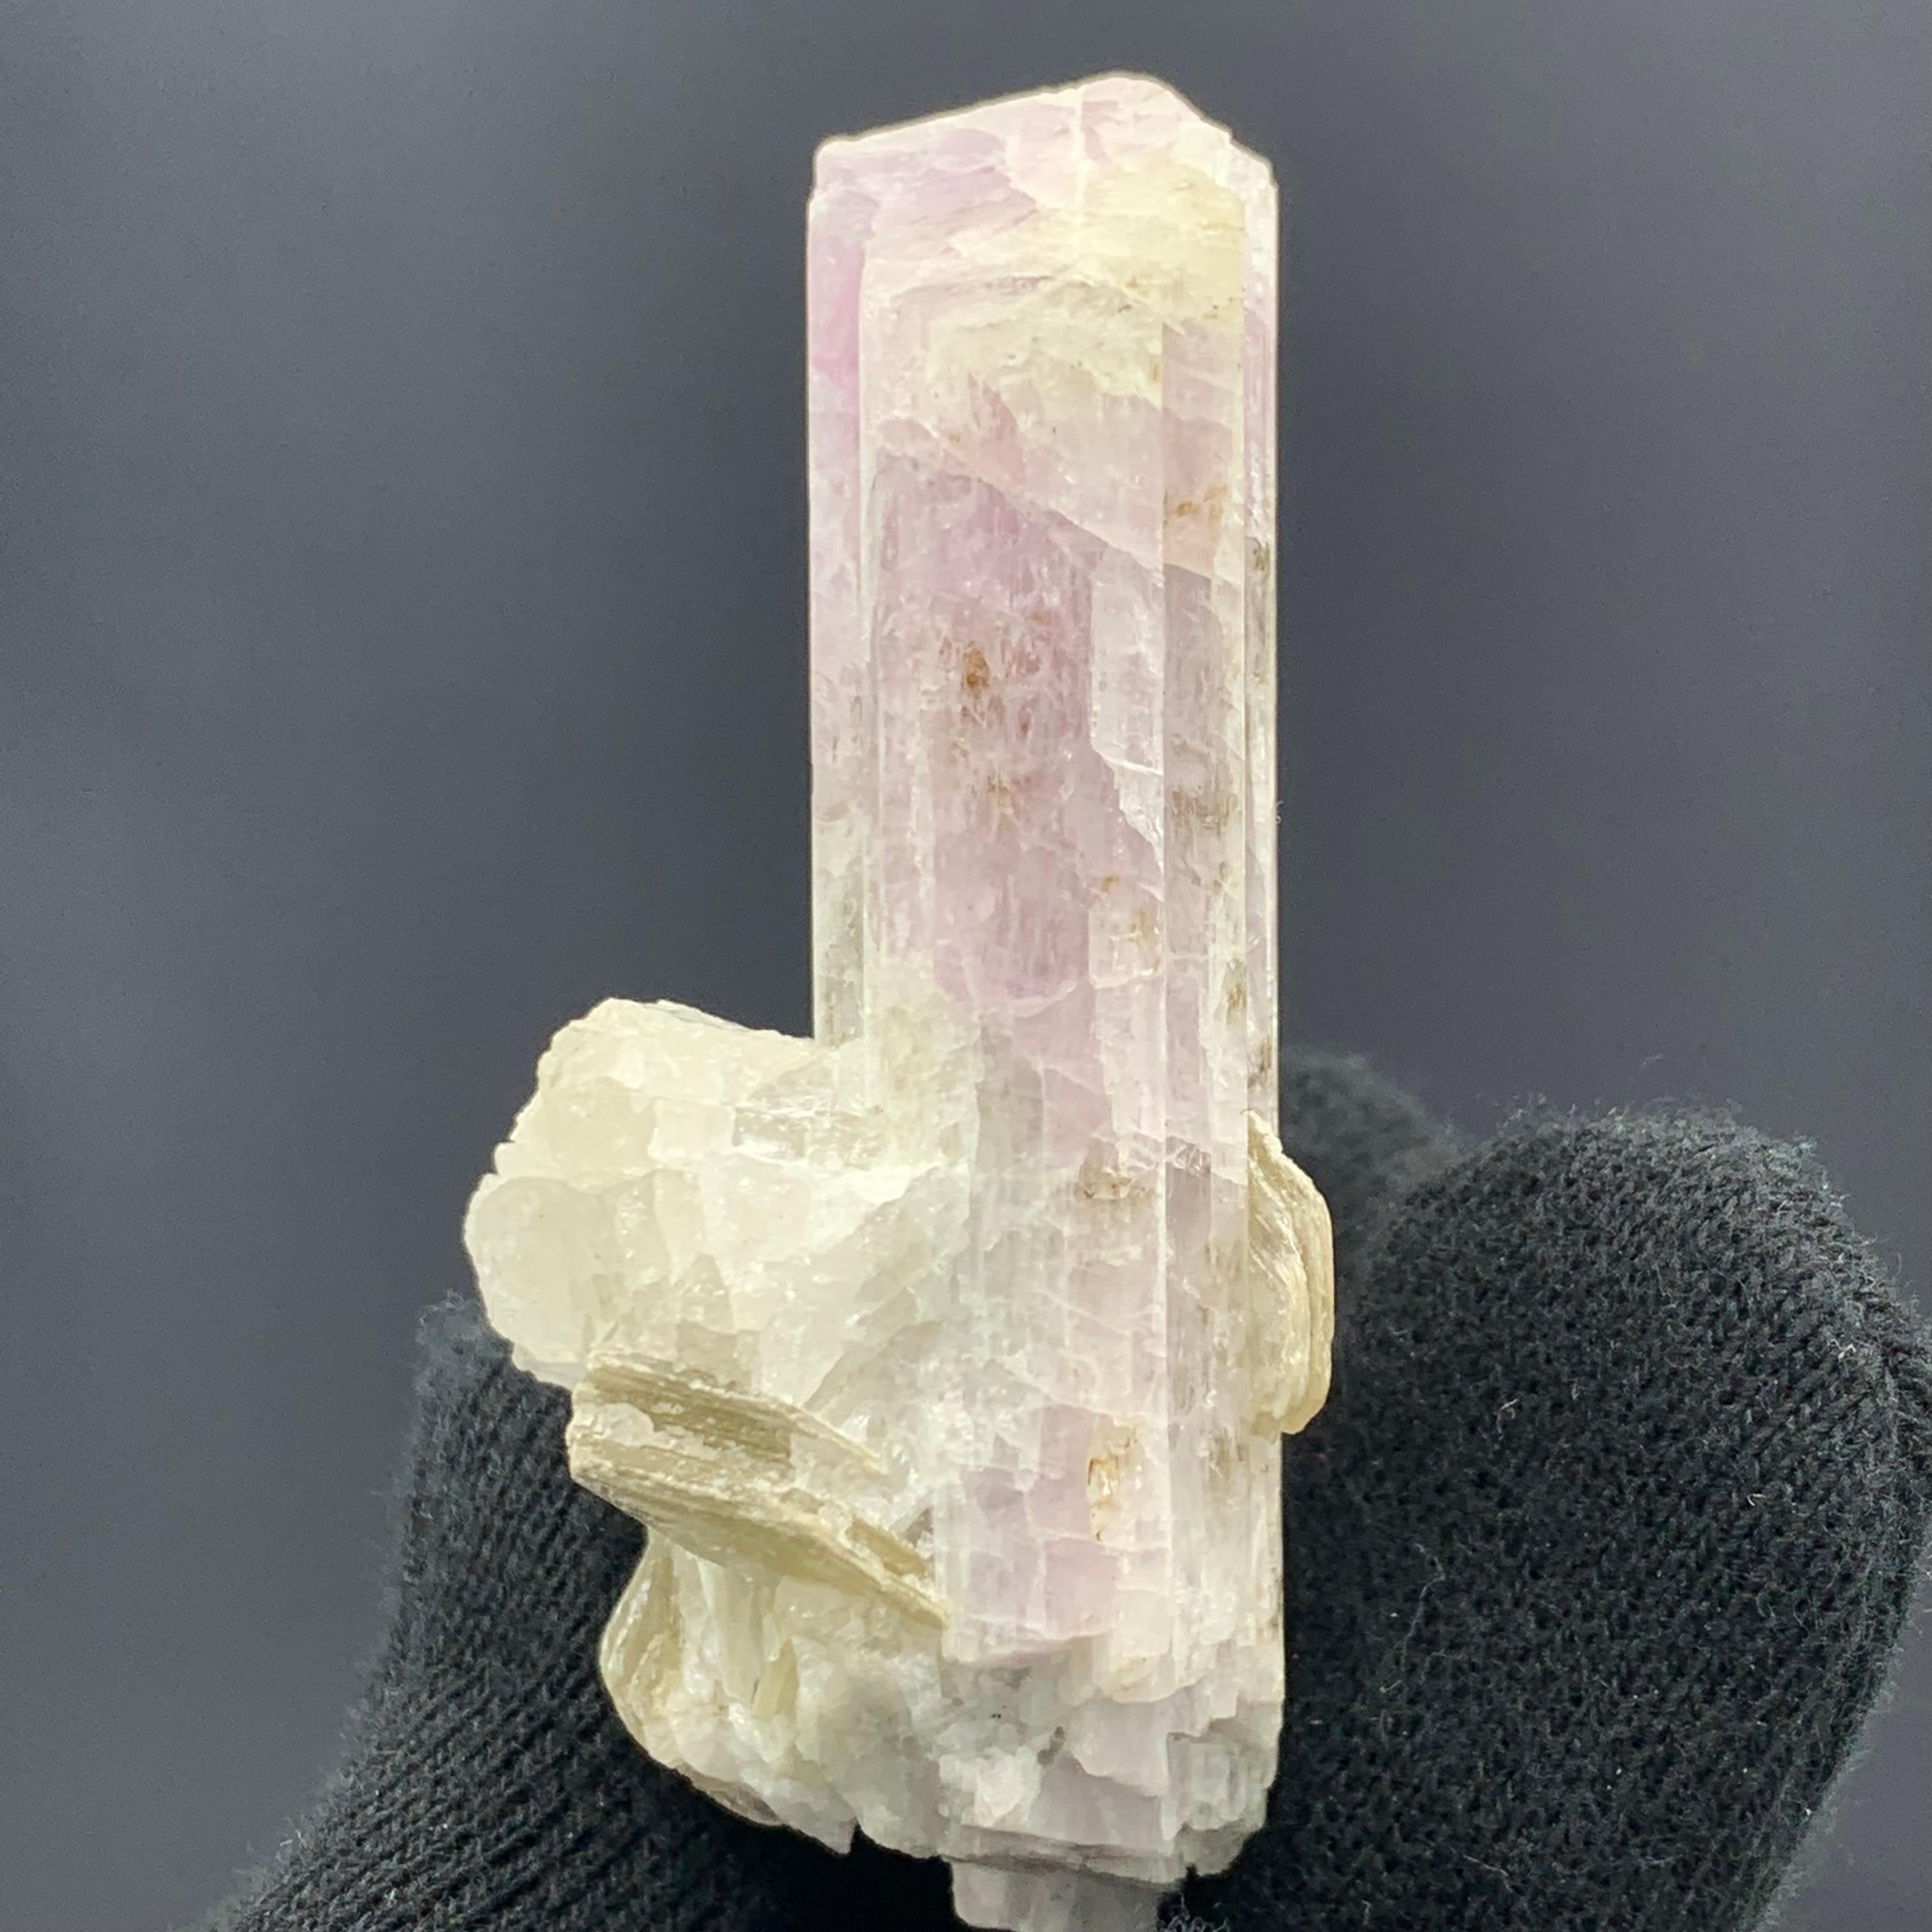 Other 66.90 Gram lovely Kunzite Specimen With Muscovite From Kunar, Afghanistan  For Sale